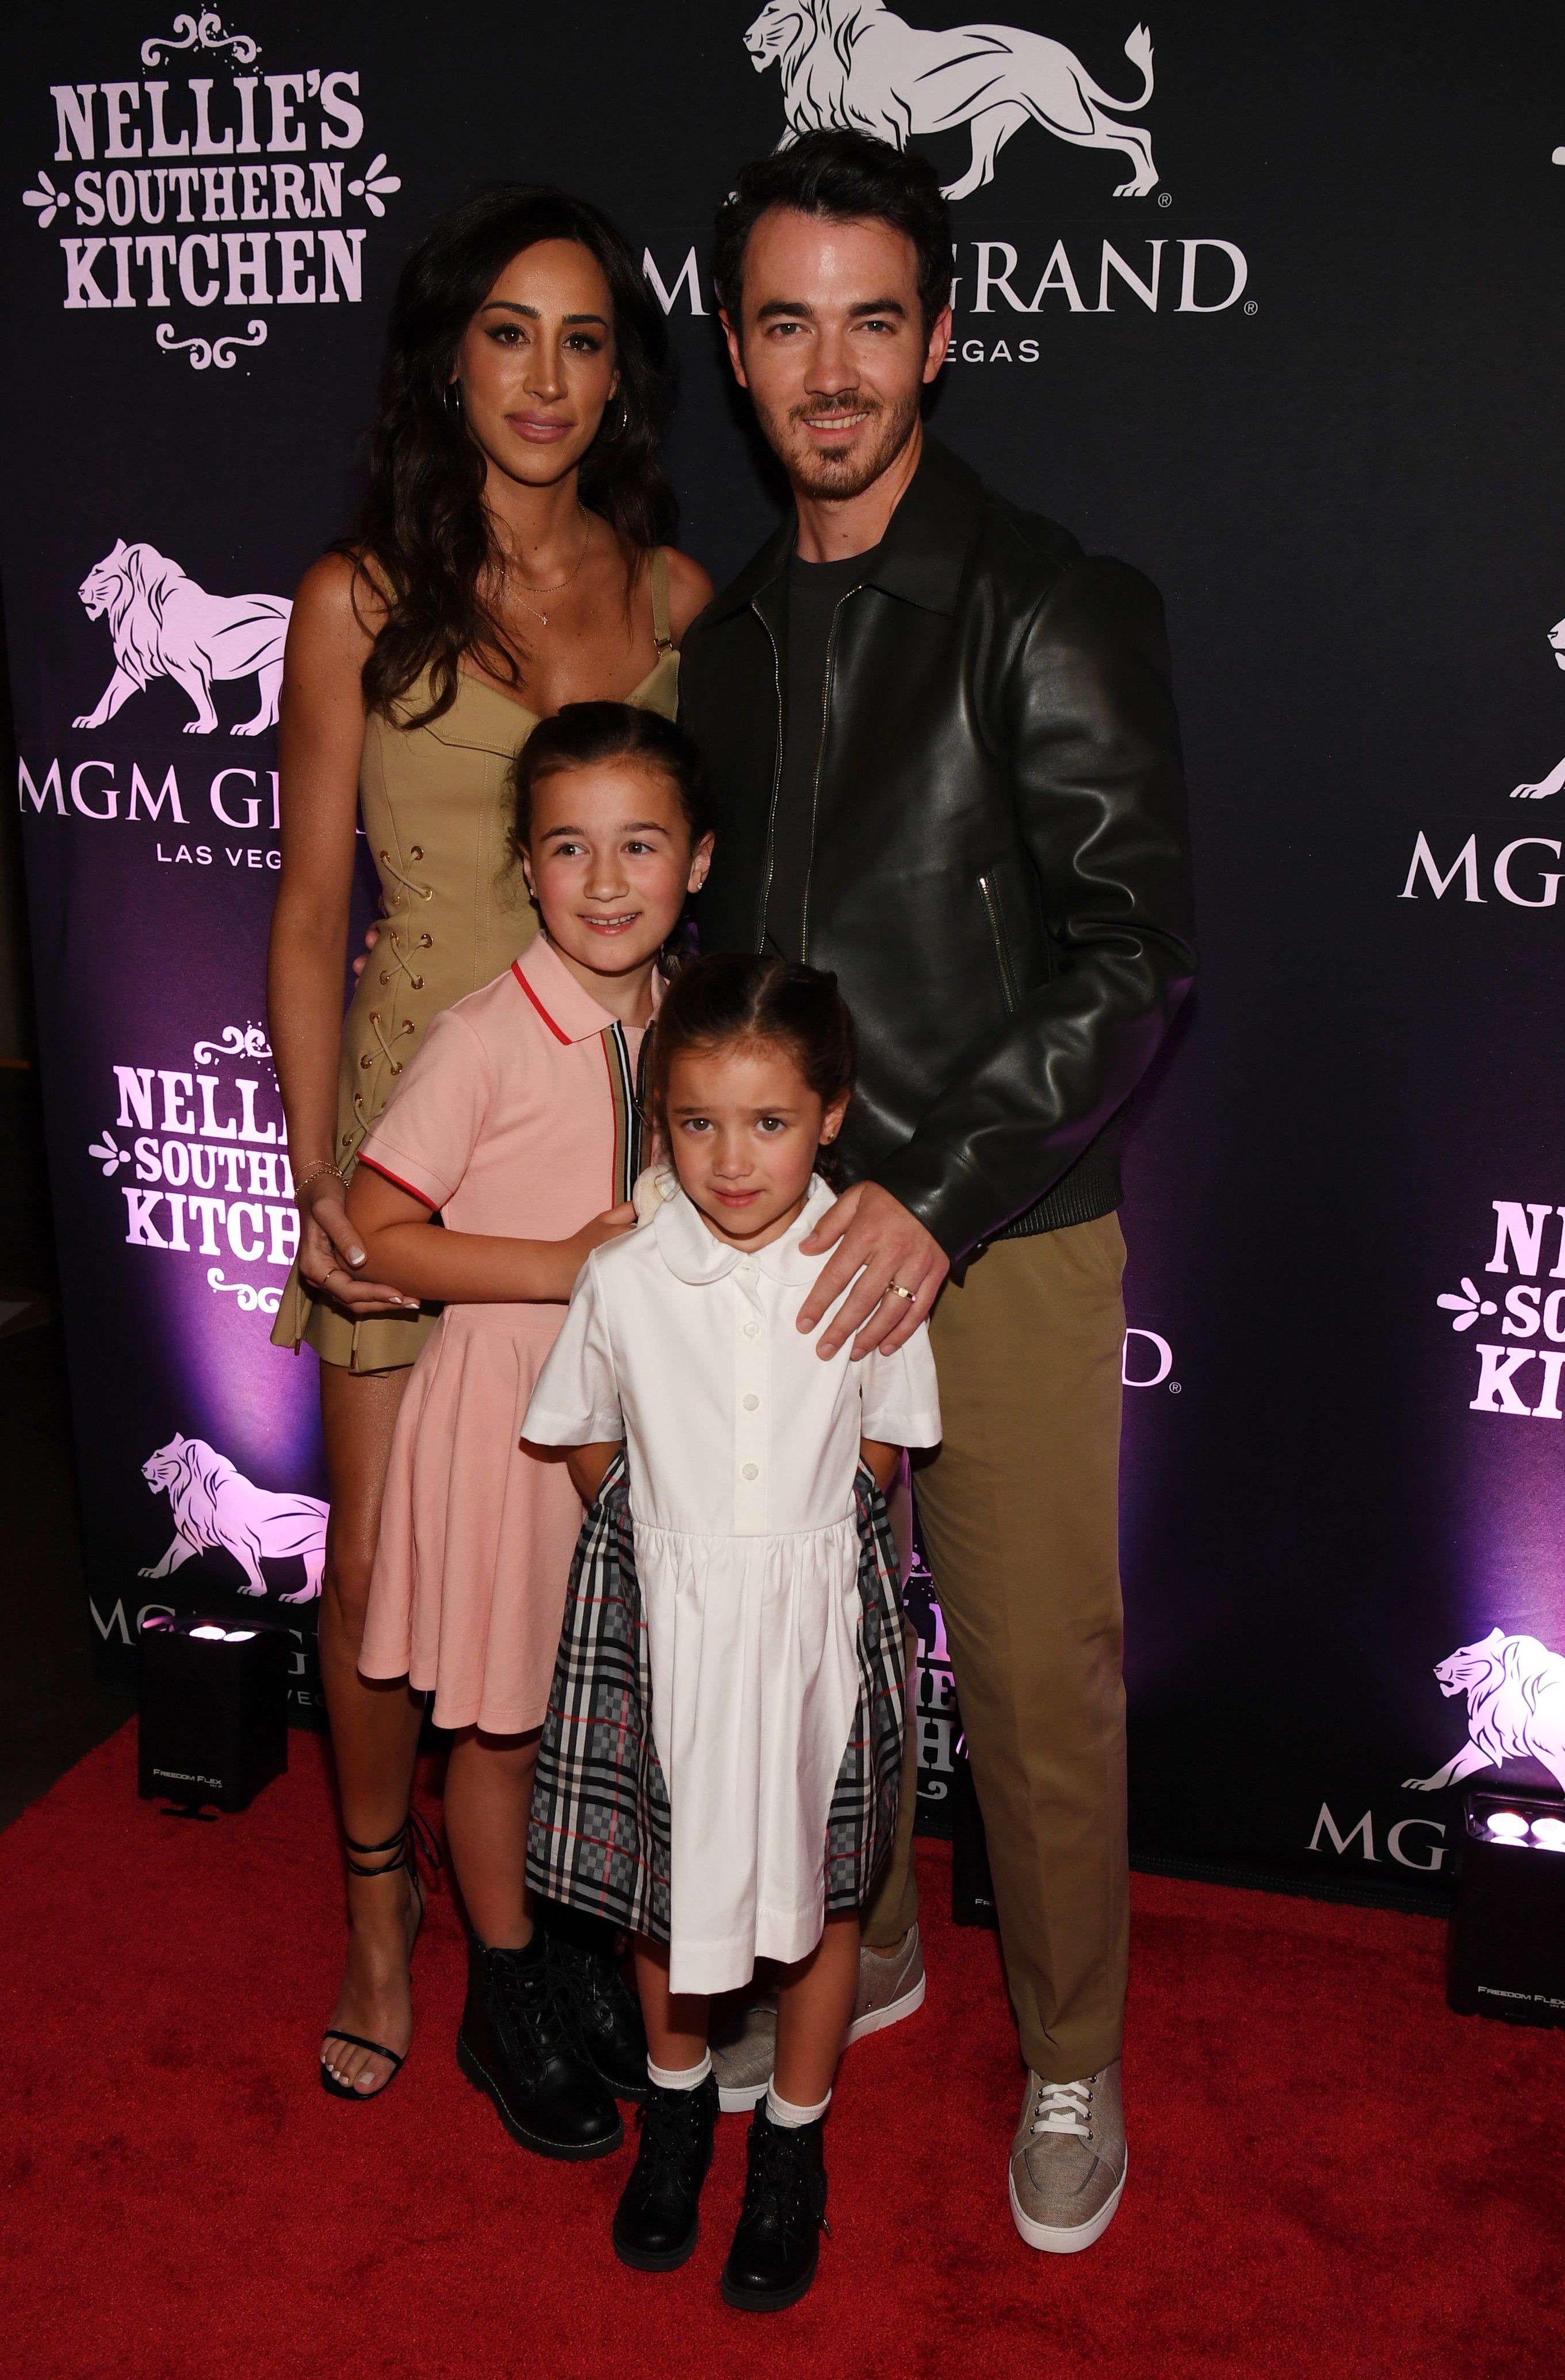 Kevin with his family on the red carpet